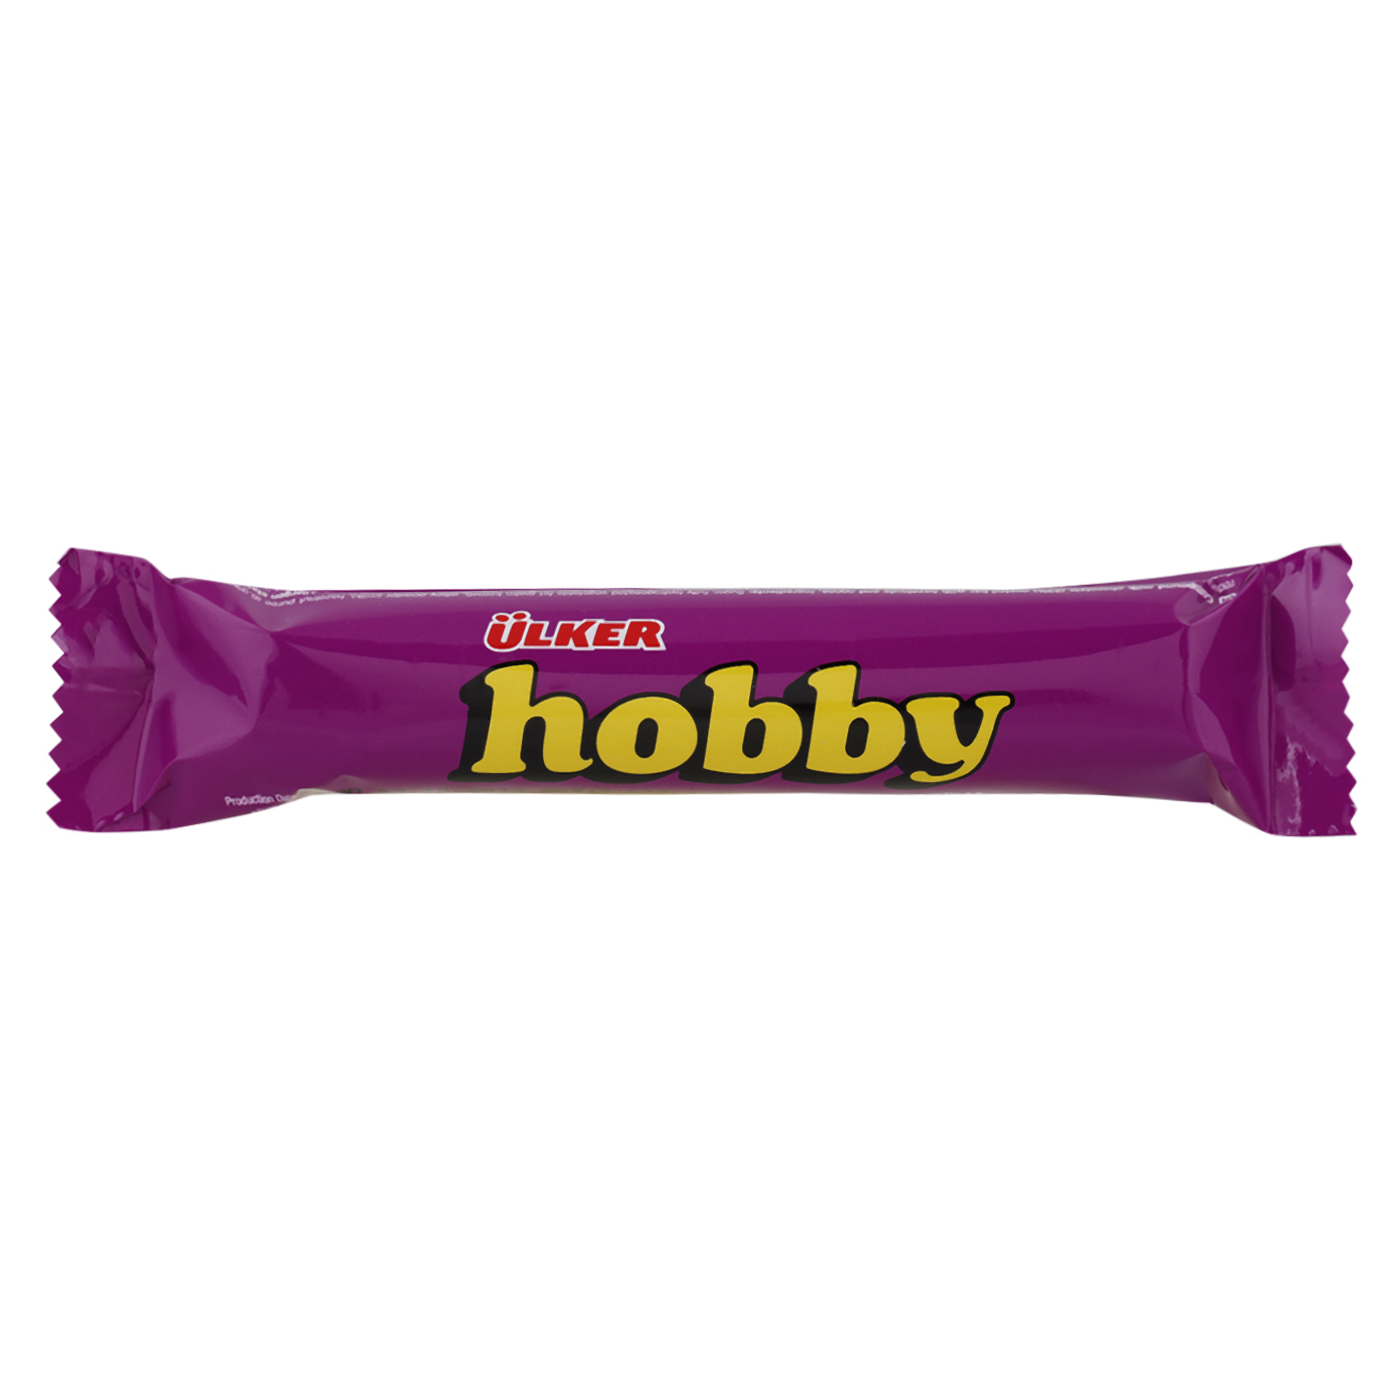 Ulker Hobby Cocoa and Hazelnuts Milk Chocolate Bar 30 gr Pack of 36